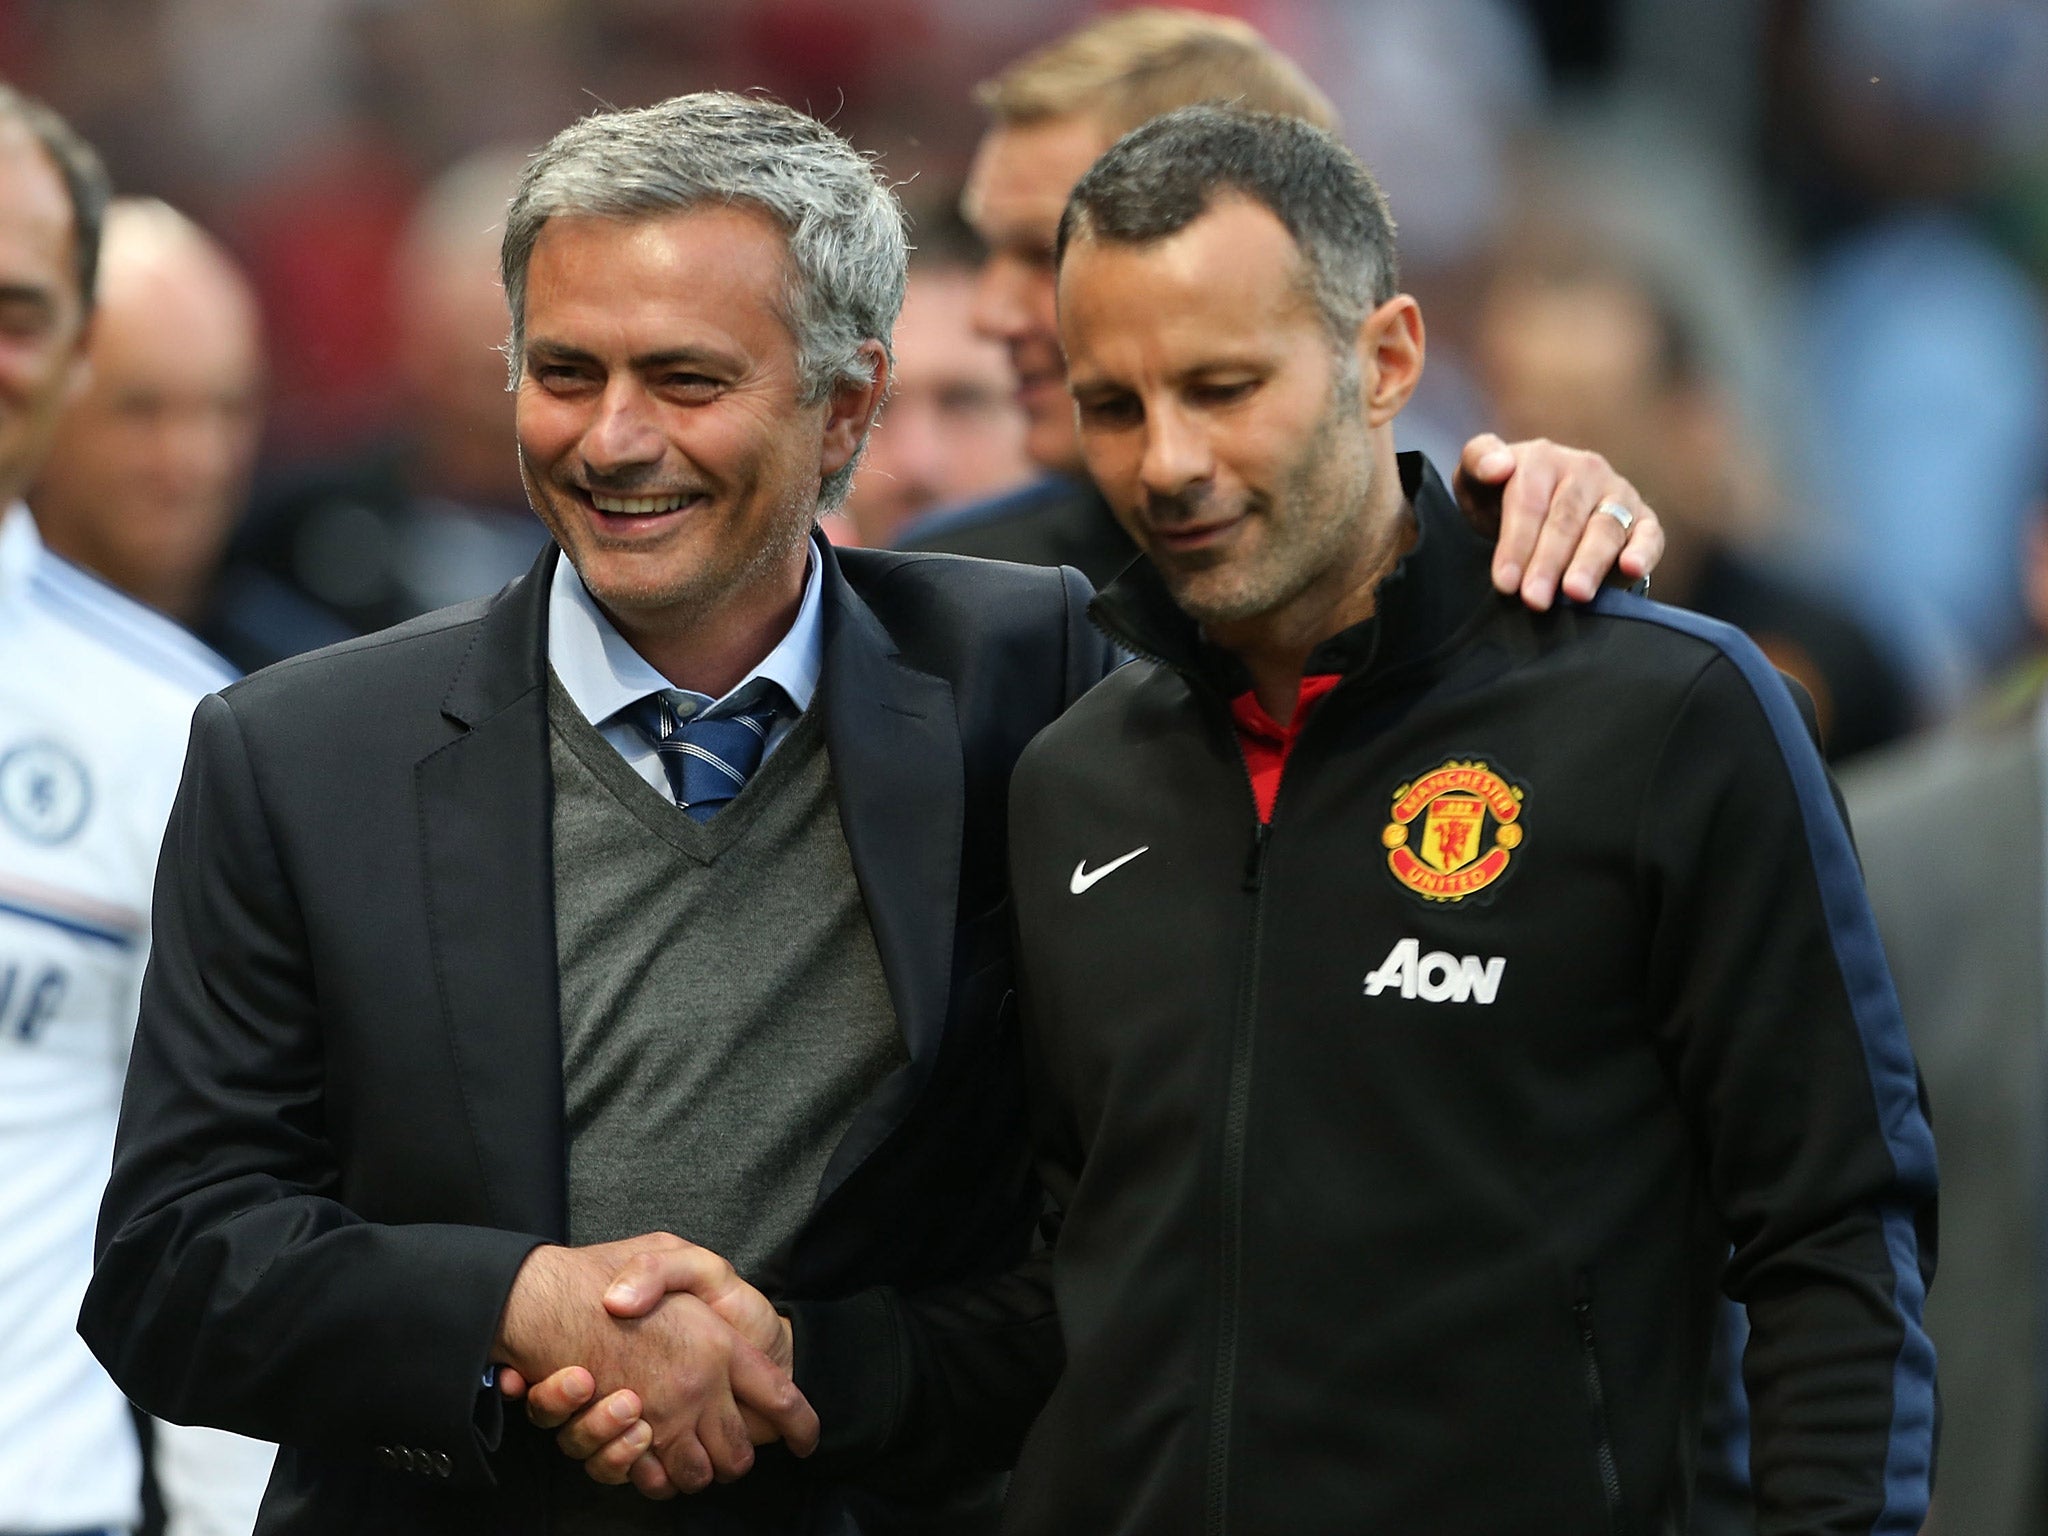 Ryan Giggs could choose to stay at Manchester United under Jose Mourinho